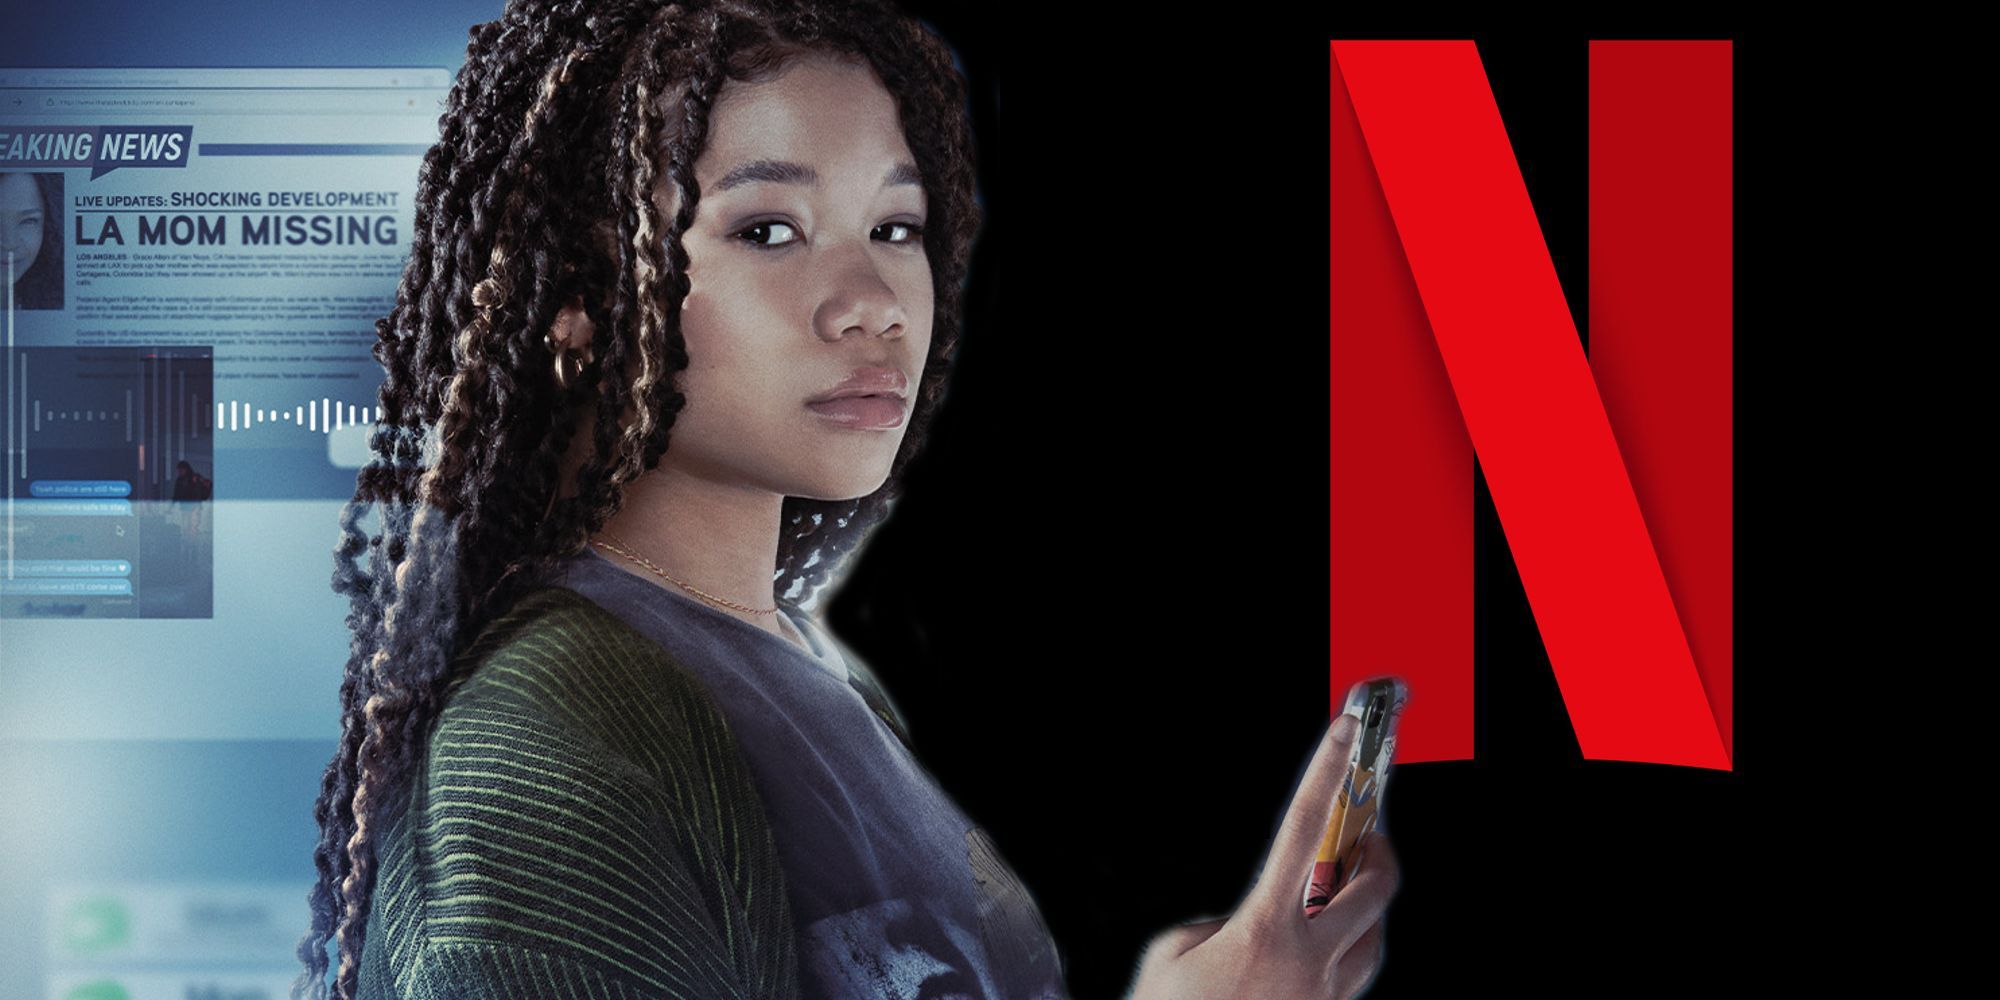 Custom image of Storm Reid in Missing and the Netflix logo